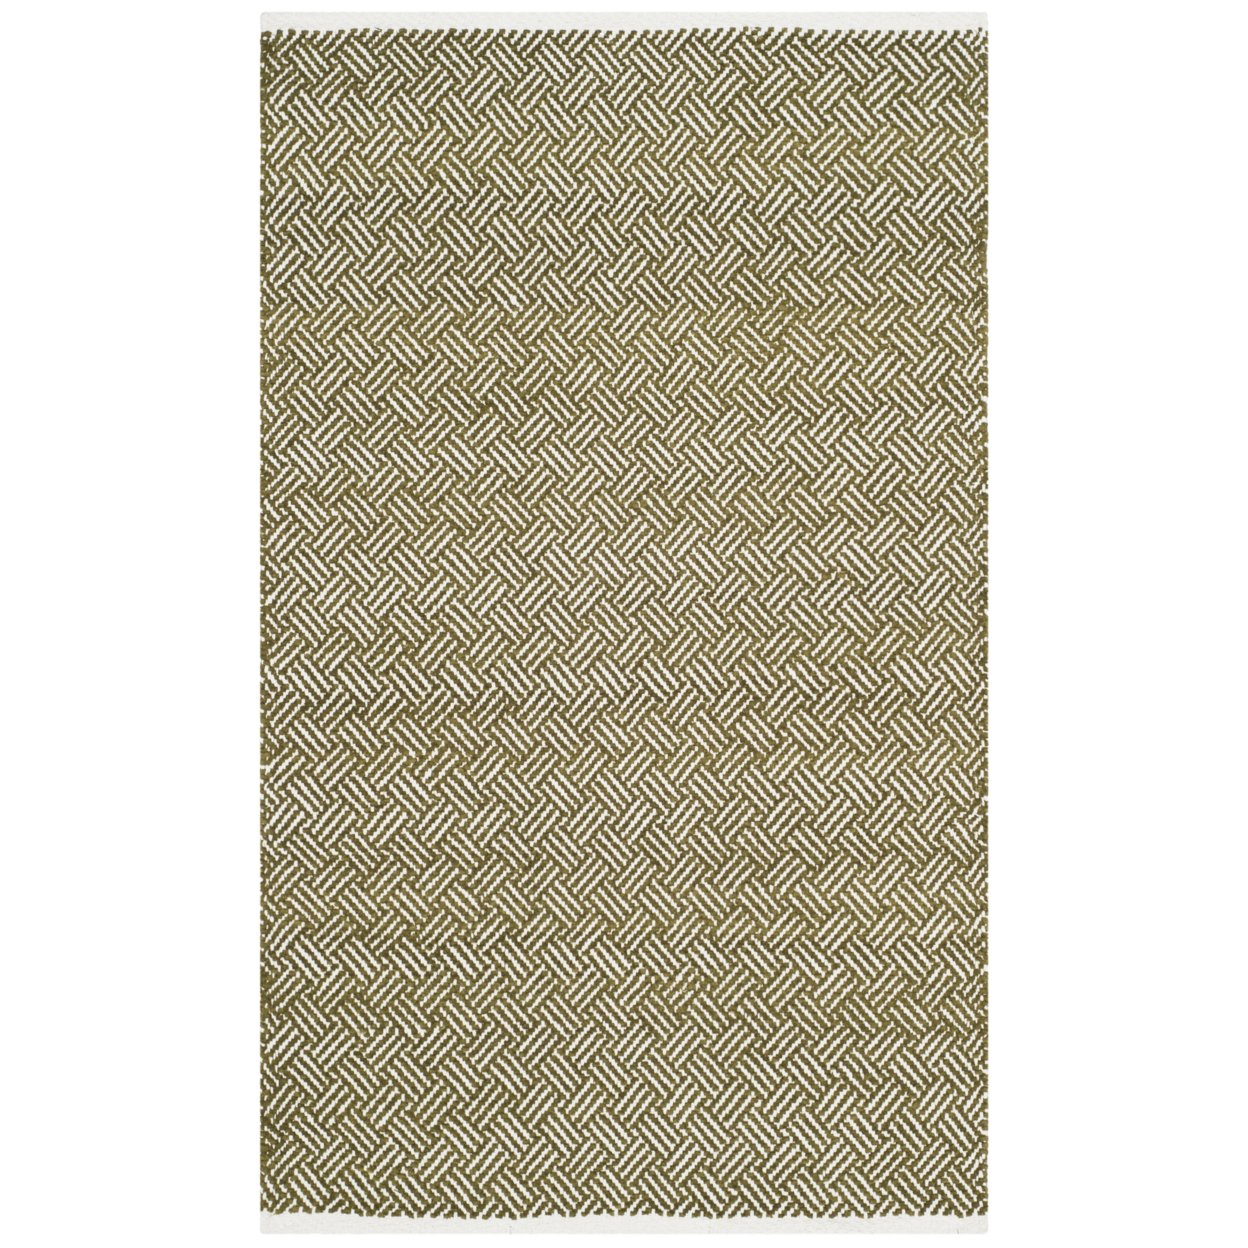 SAFAVIEH Boston Collection BOS680B Handwoven Olive Rug - 3' X 5'